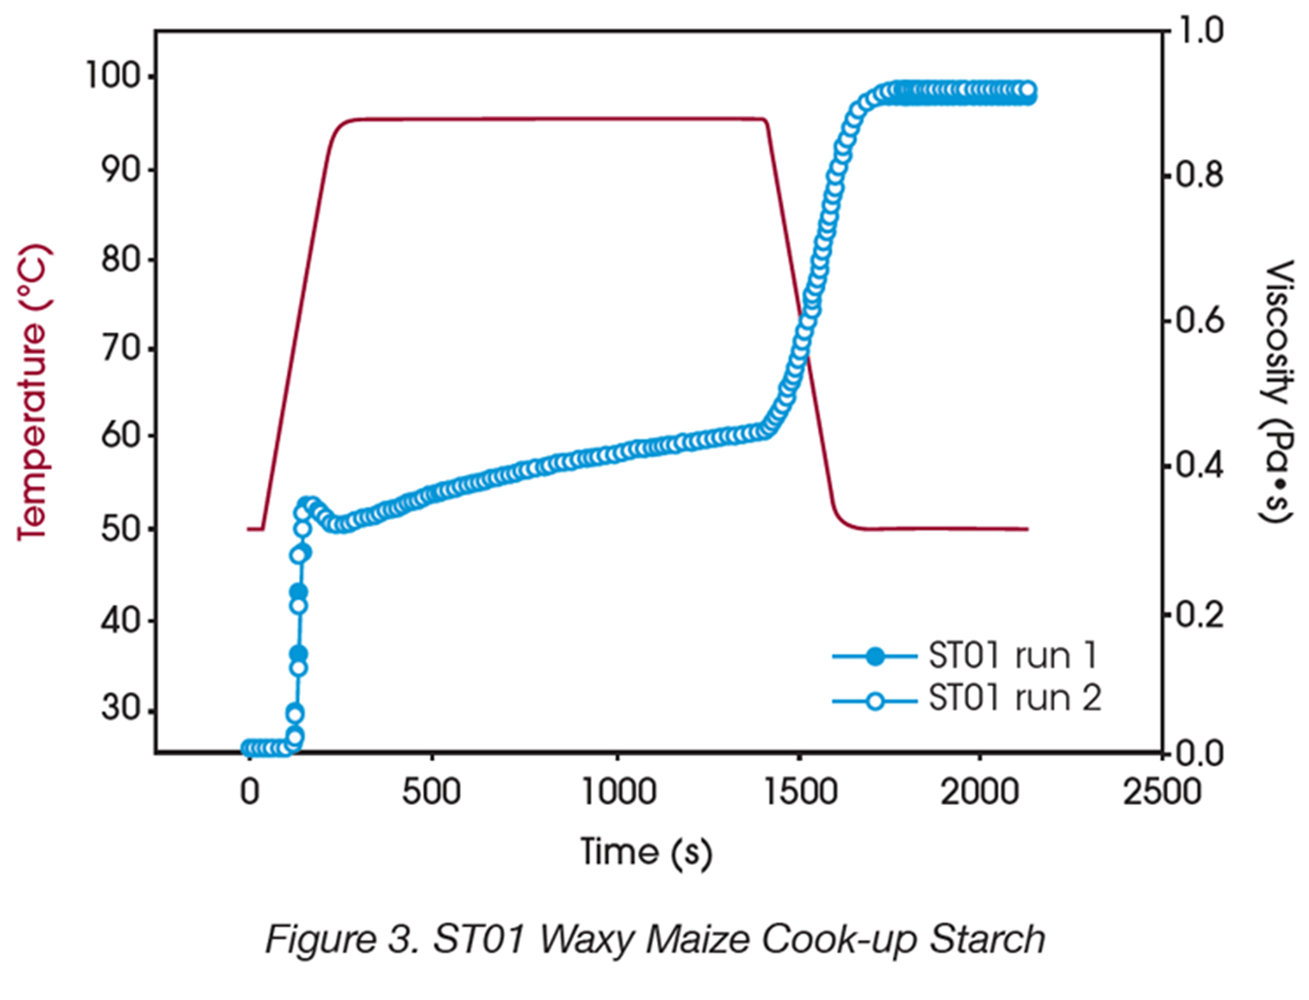 Figure 3. ST01 Waxy Maize Cook-up Starch